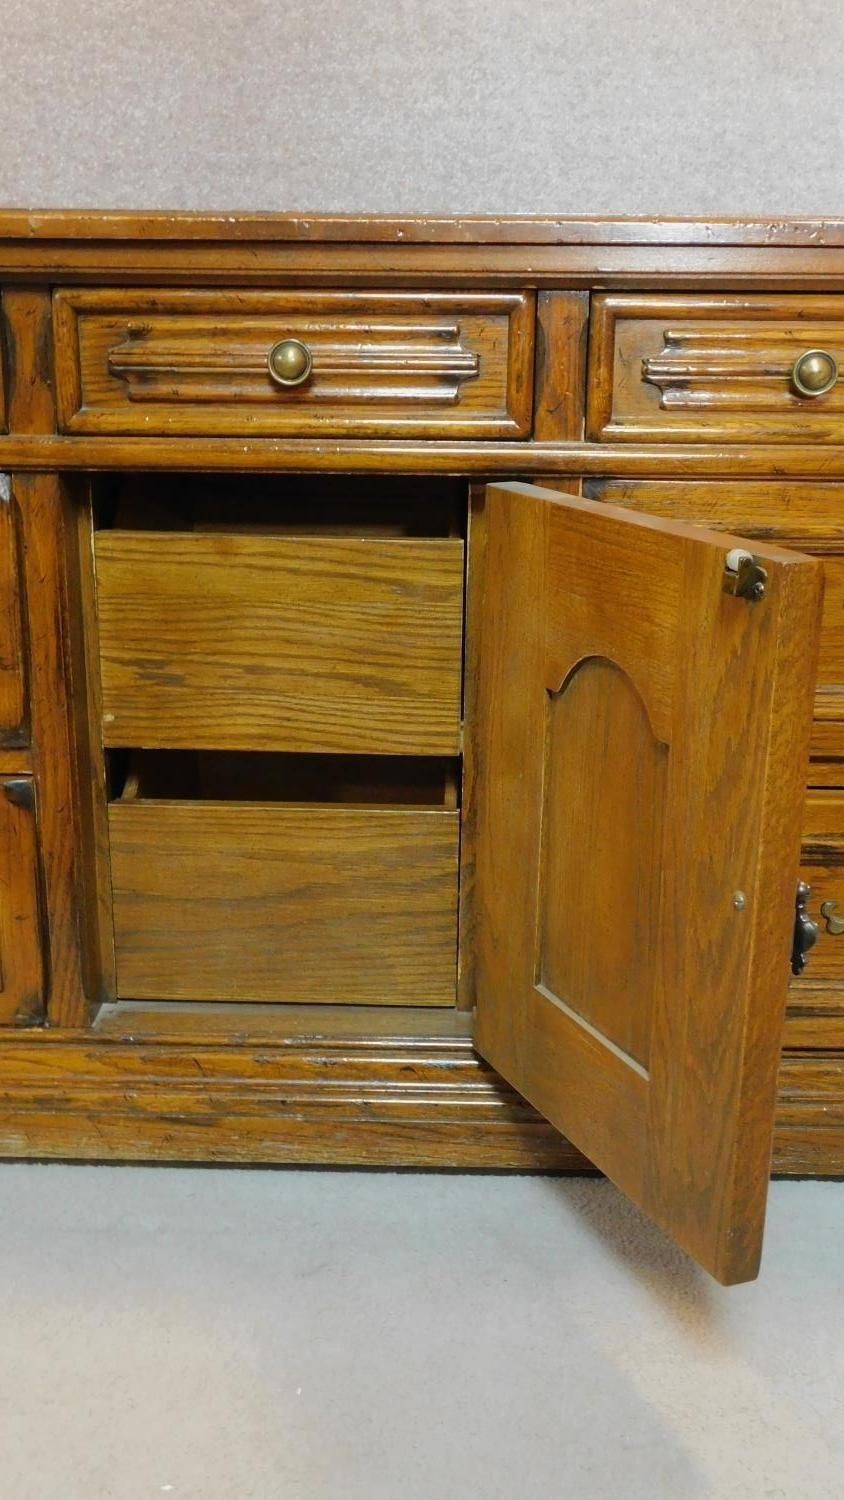 A French provincial style oak sideboard fitted with an arrangement of drawers and a central cupboard - Image 3 of 6